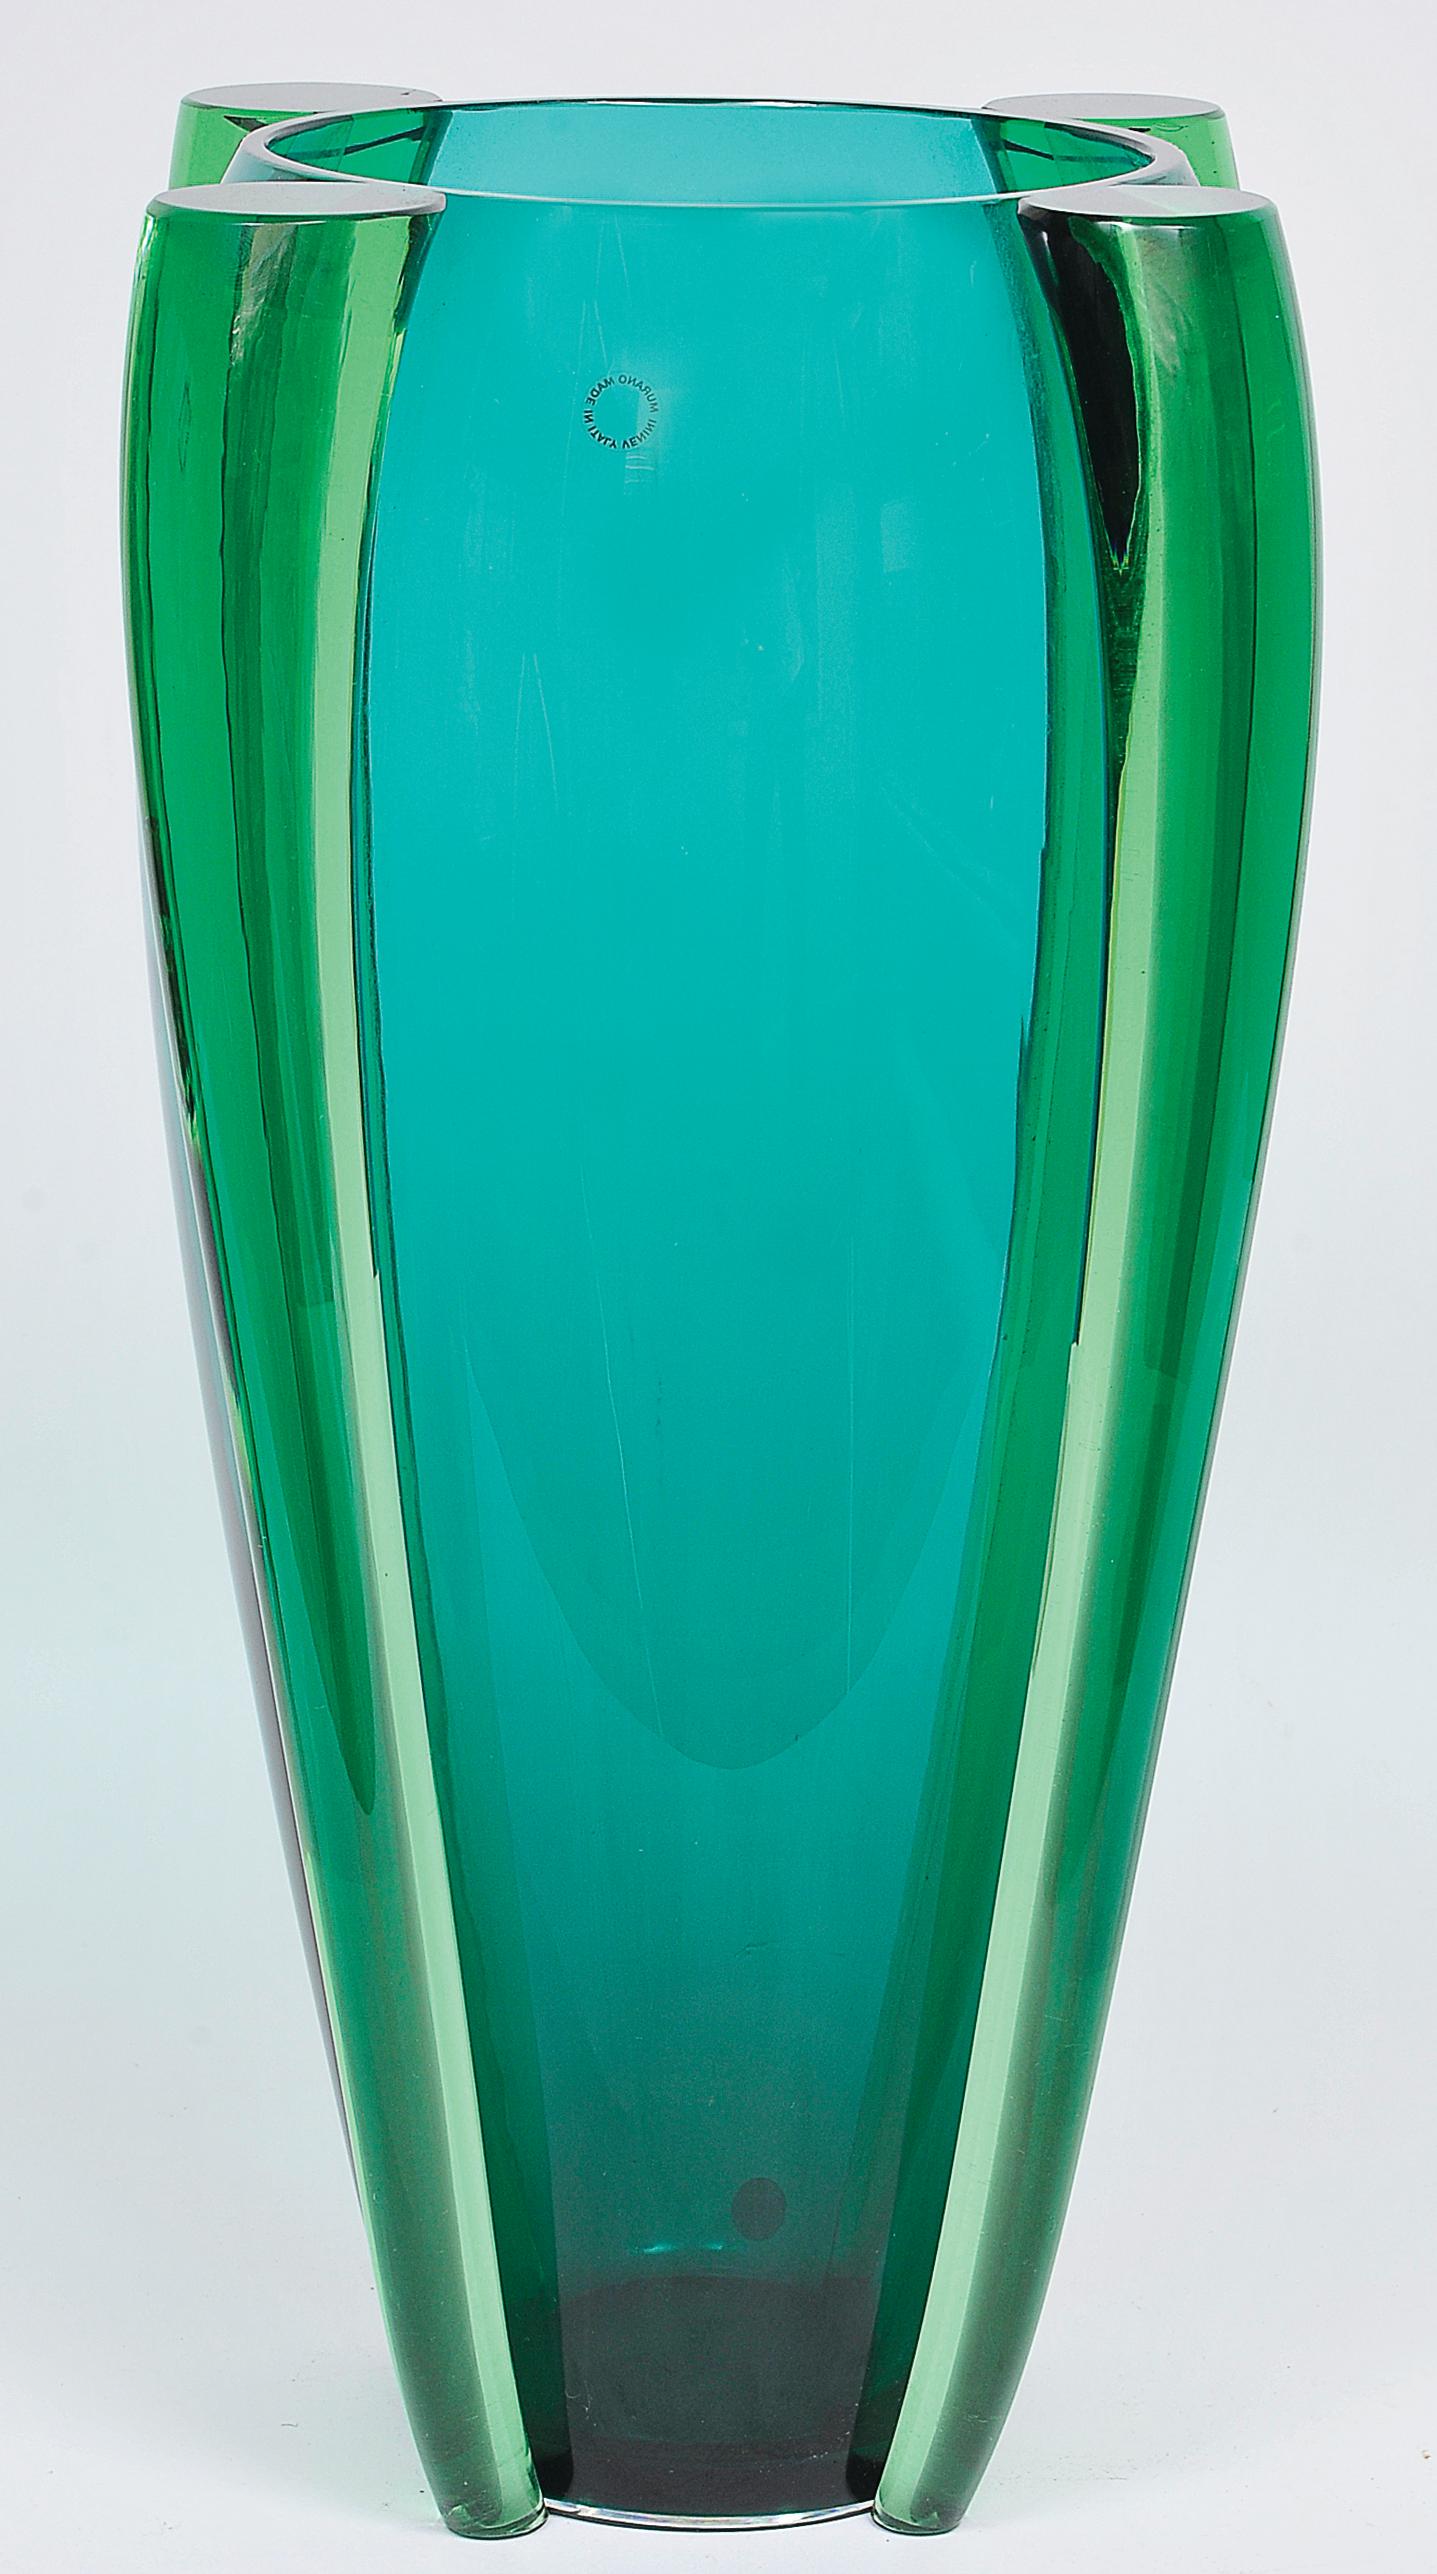 Incredible tall vase by Venini in strong emerald green with four applied parts of glass along the body of the vase.